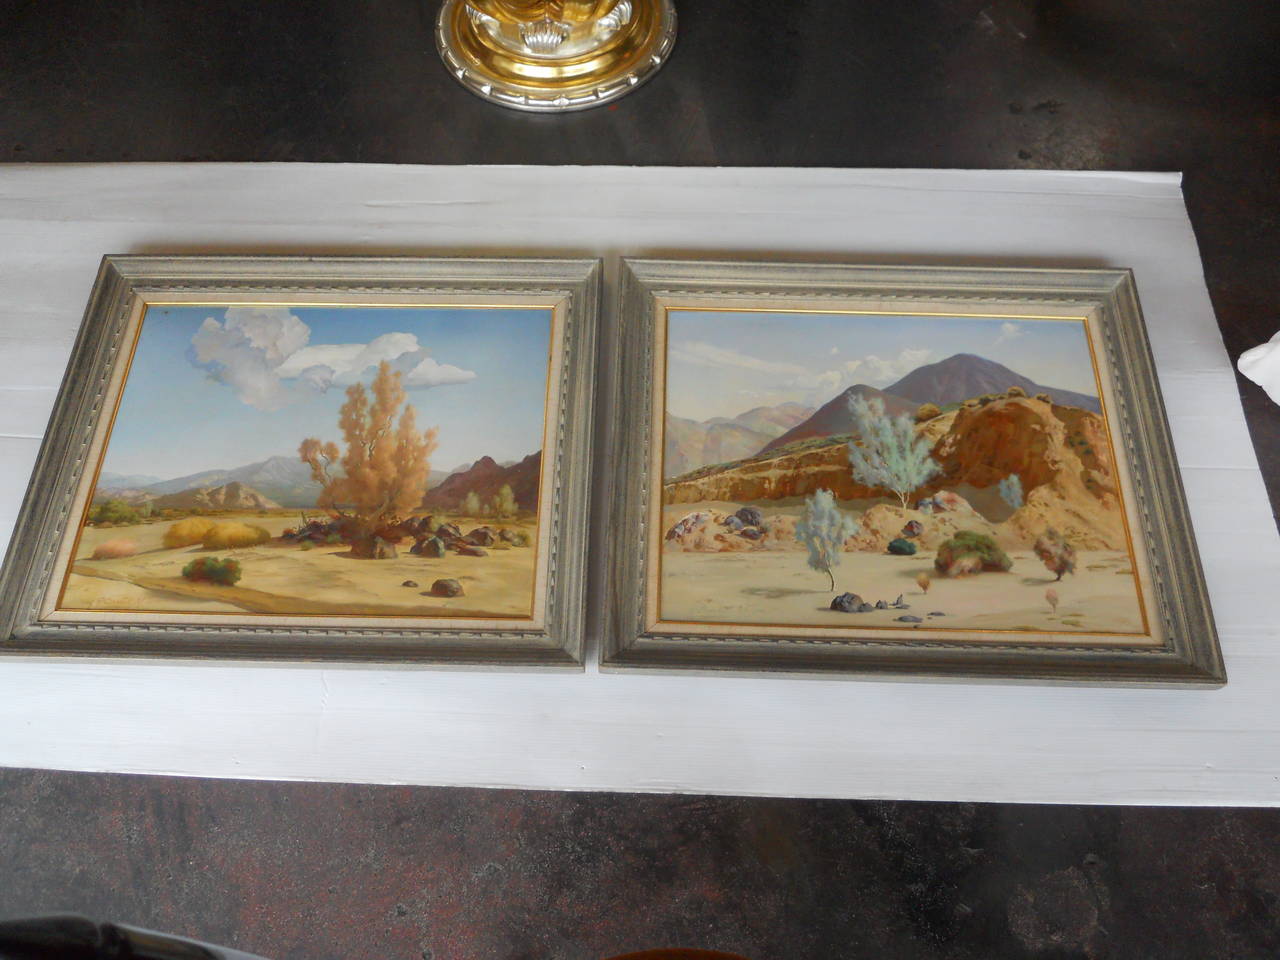 Charming set of two oil paintings by R. Brownell McGrew with signature on both pieces.
The measurements below are with the frame. Without a frame: 29.75